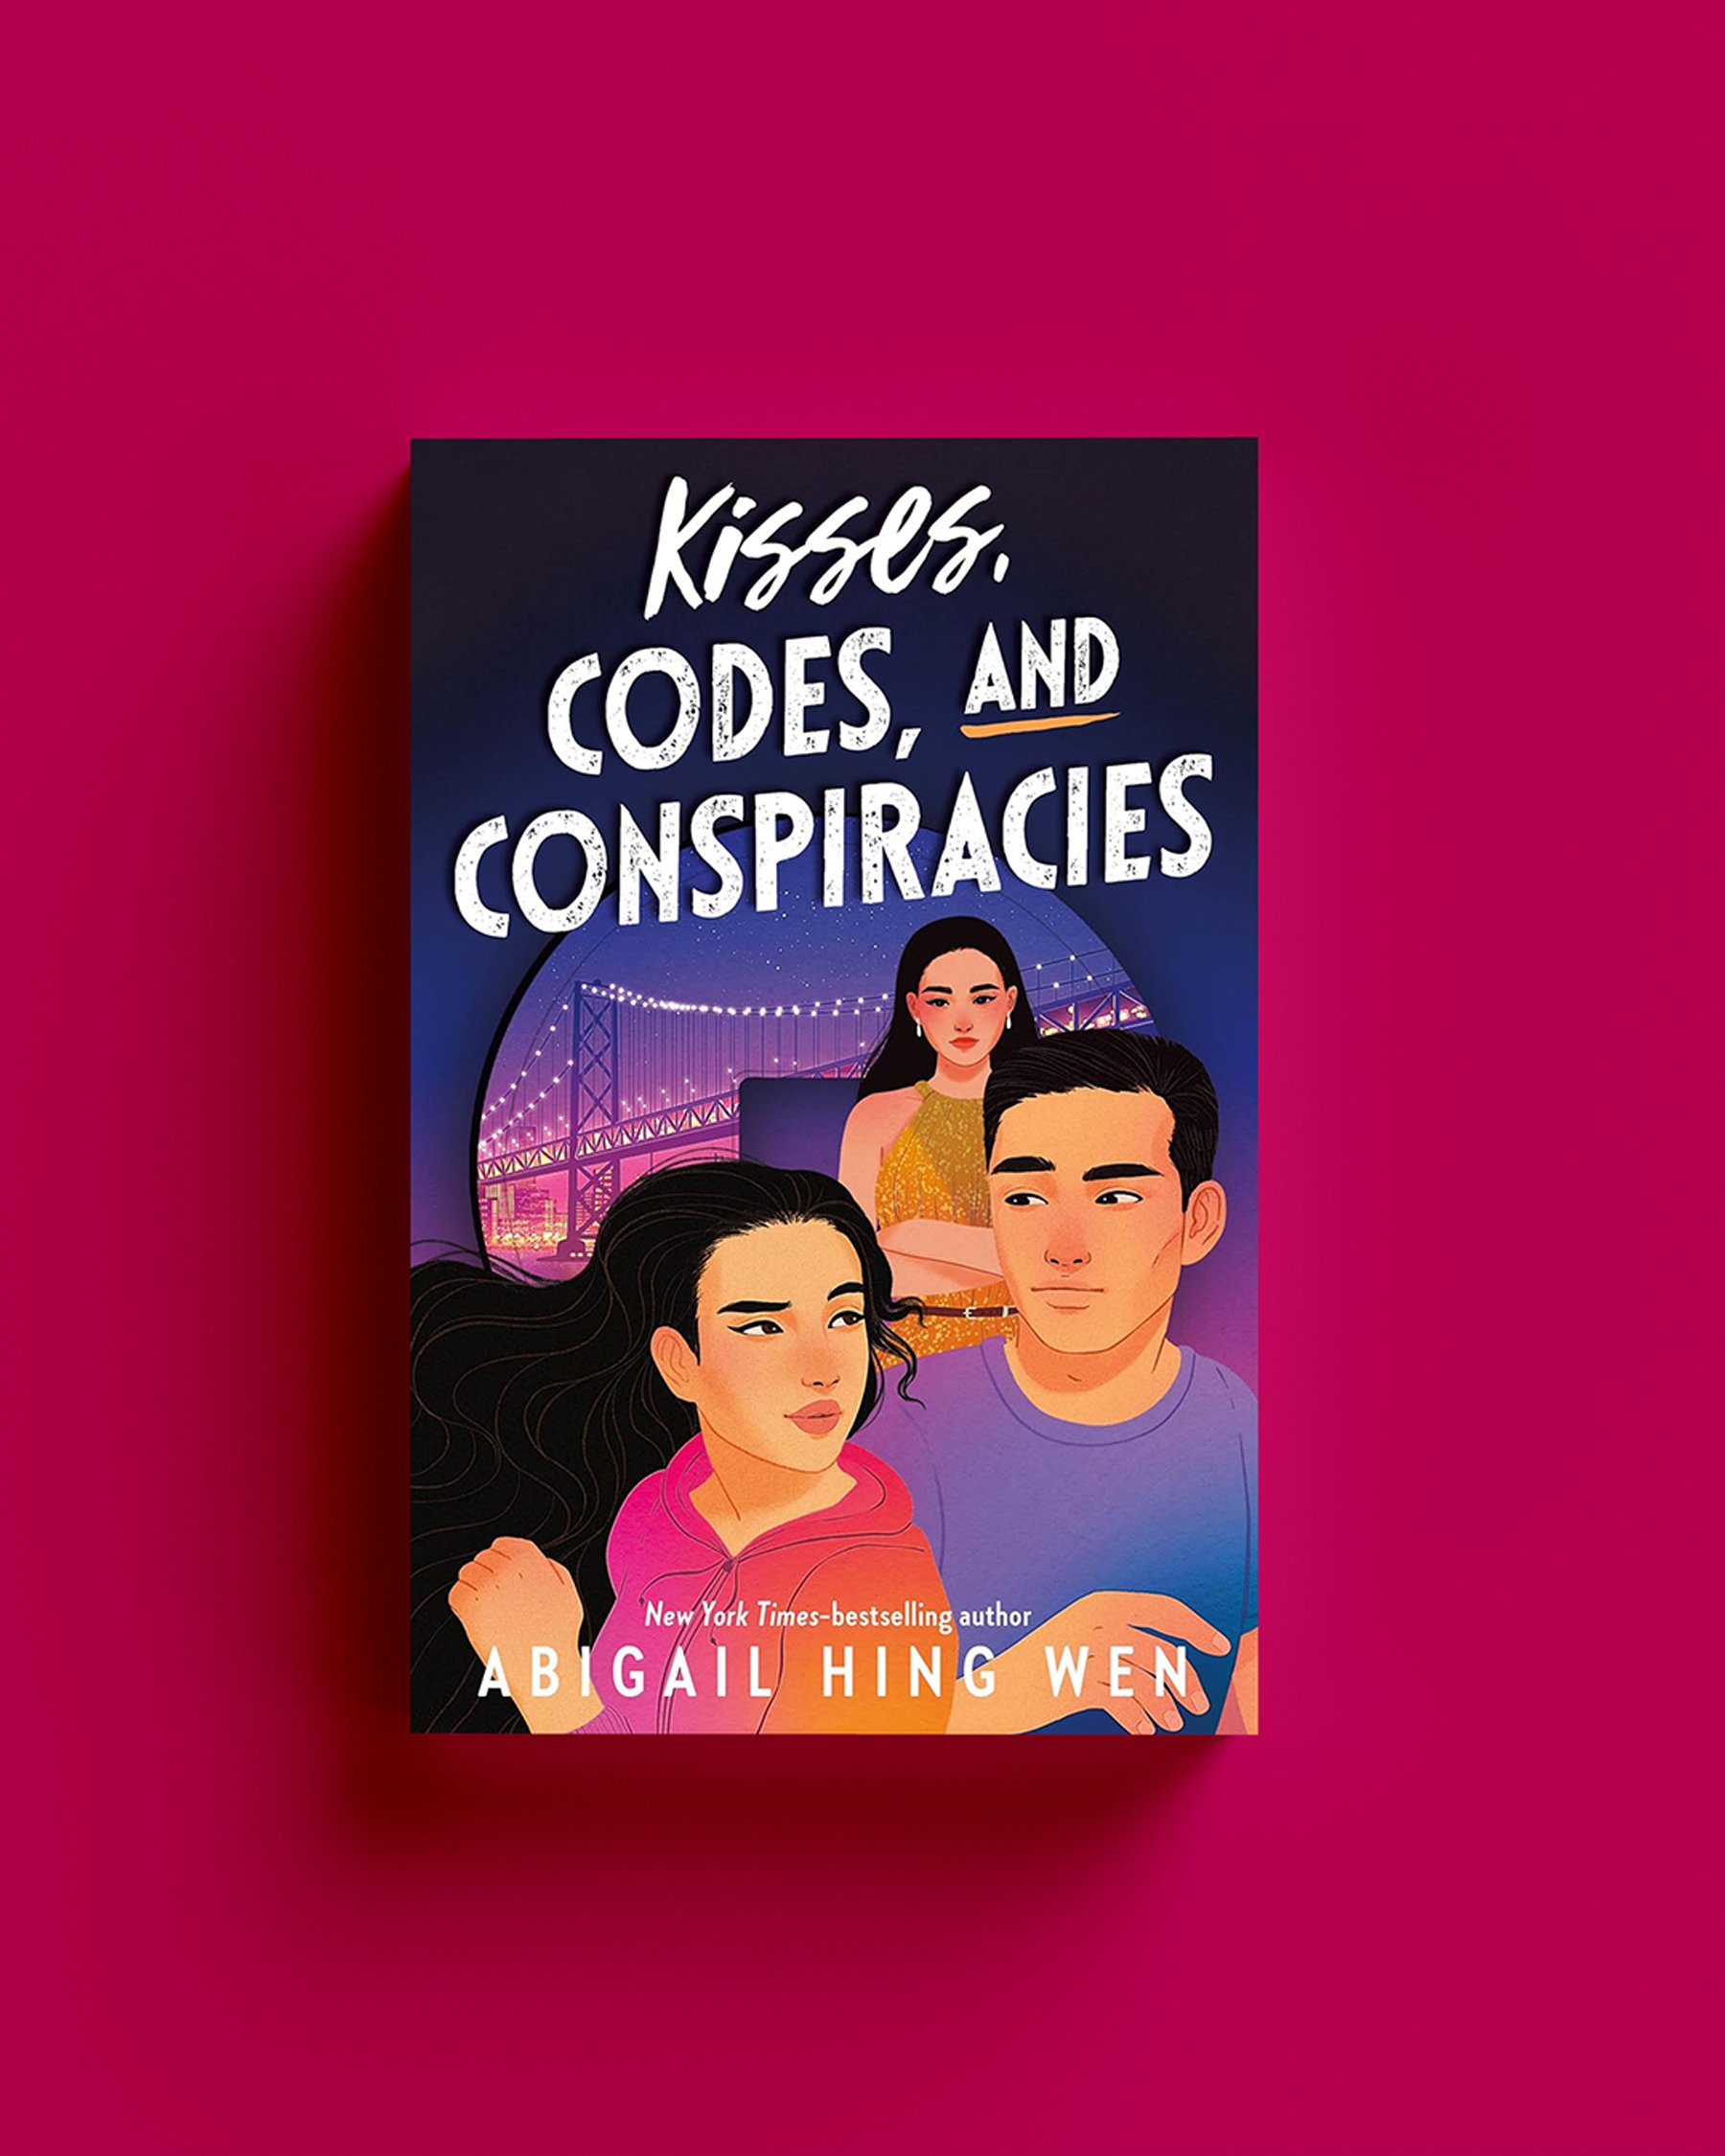 Cover for "Kisses, codes and conspiracies" by Abigail Hing Wen